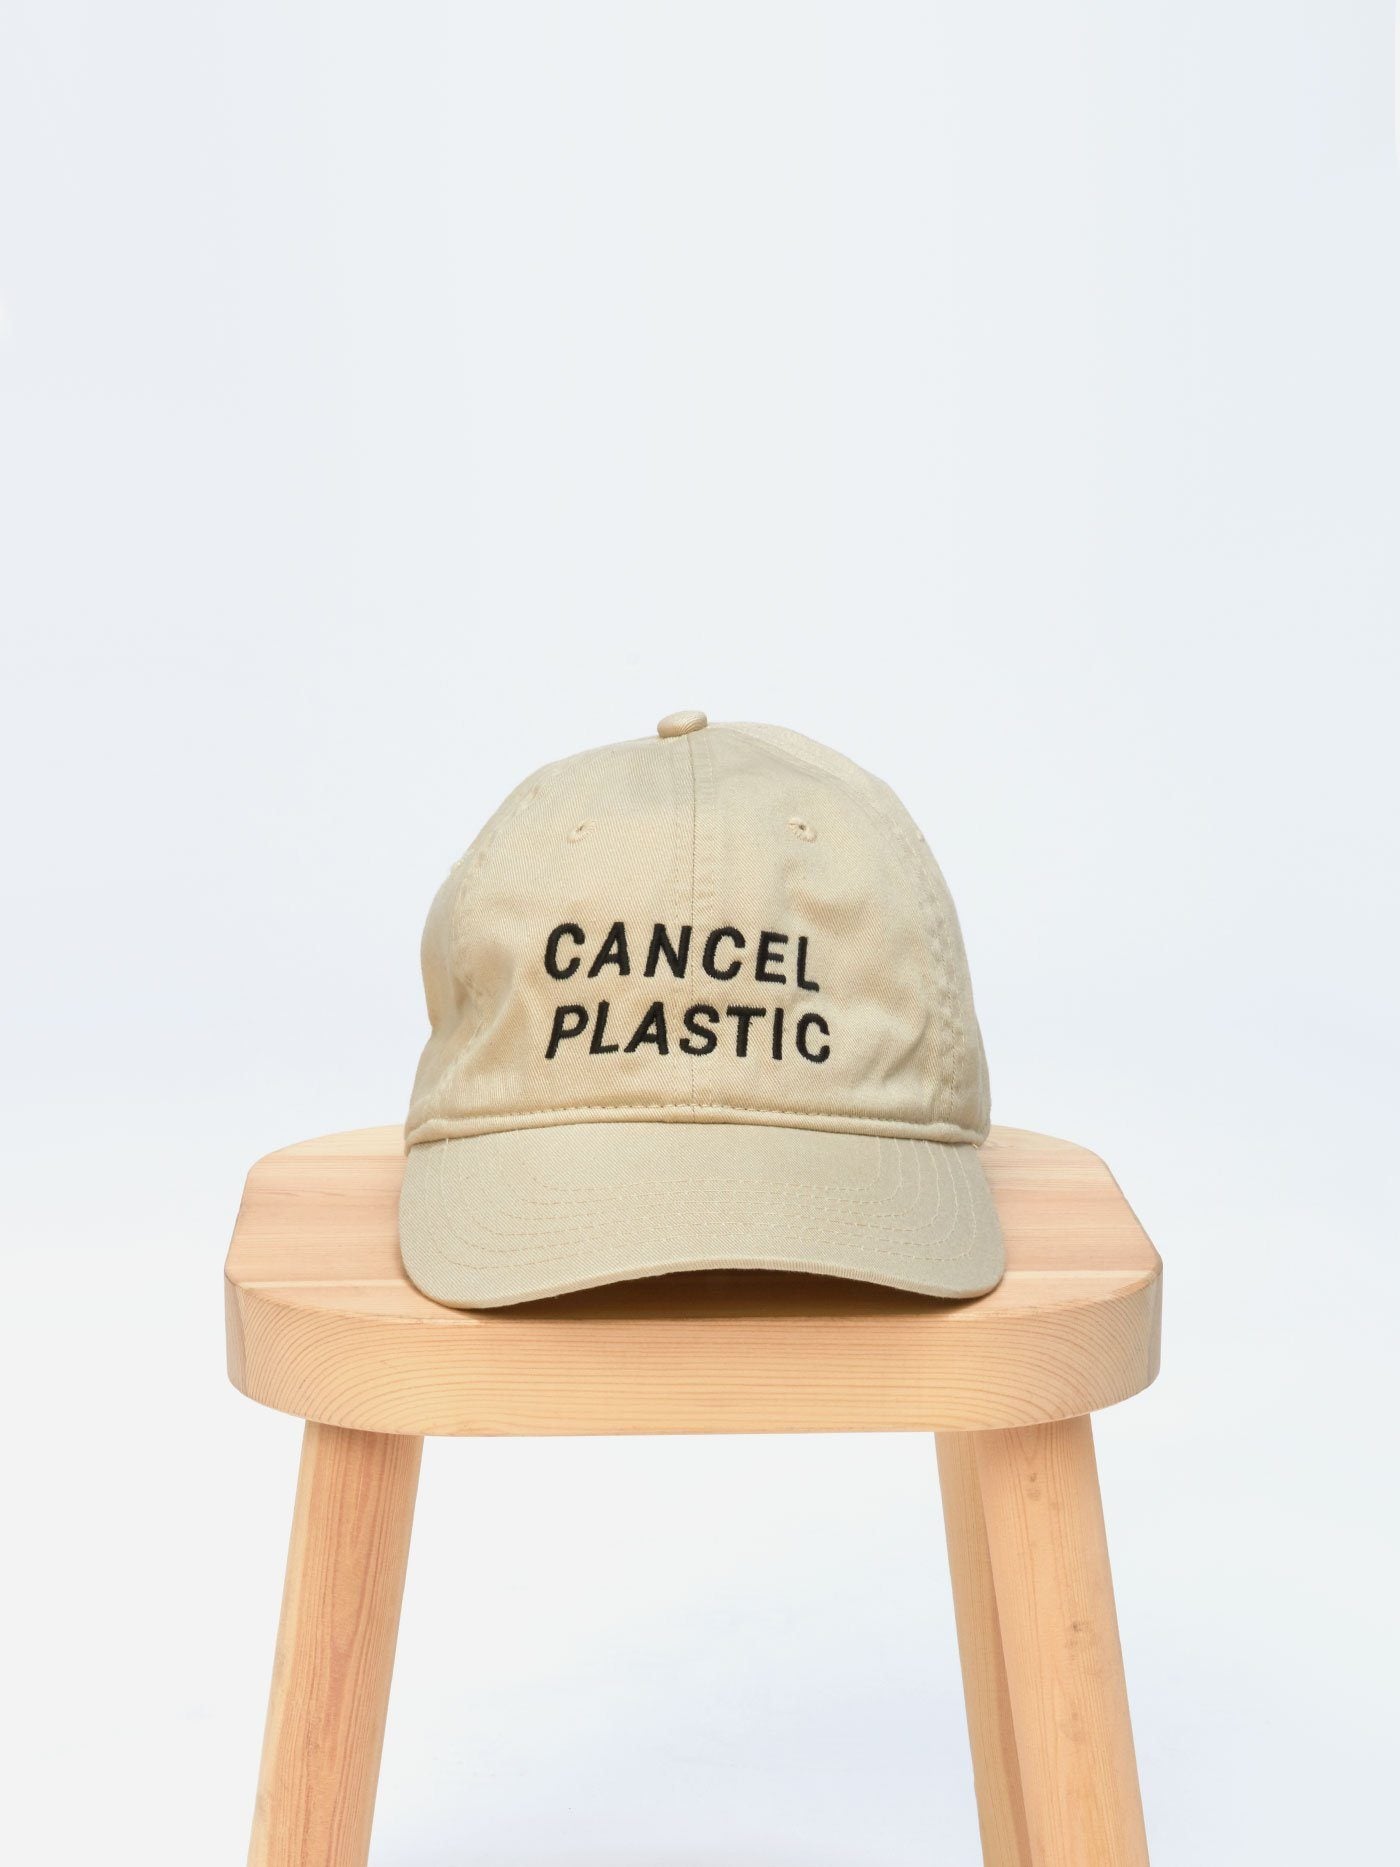 Cancel Plastic Hat Accessories - Hat Threads 4 Thought